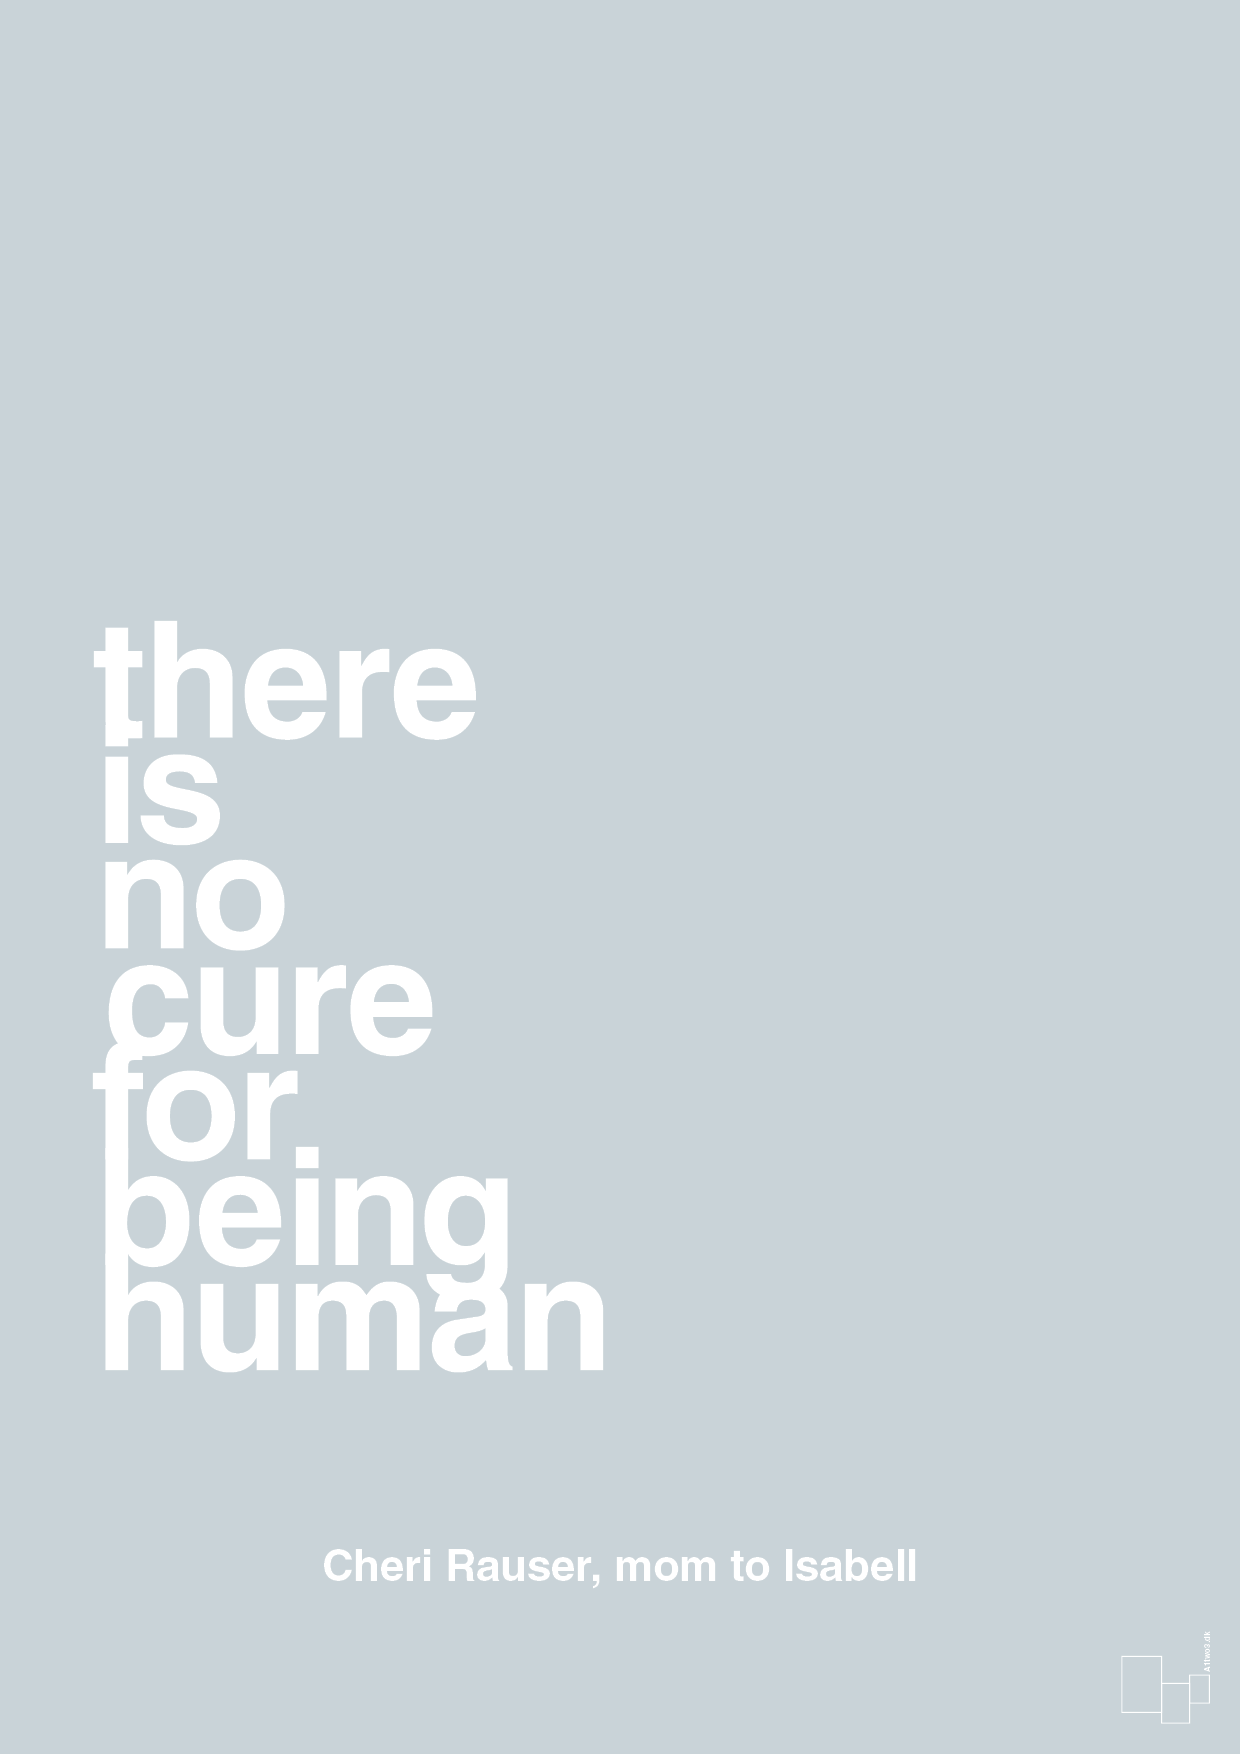 there is no cure for being human - Plakat med Samfund i Light Drizzle